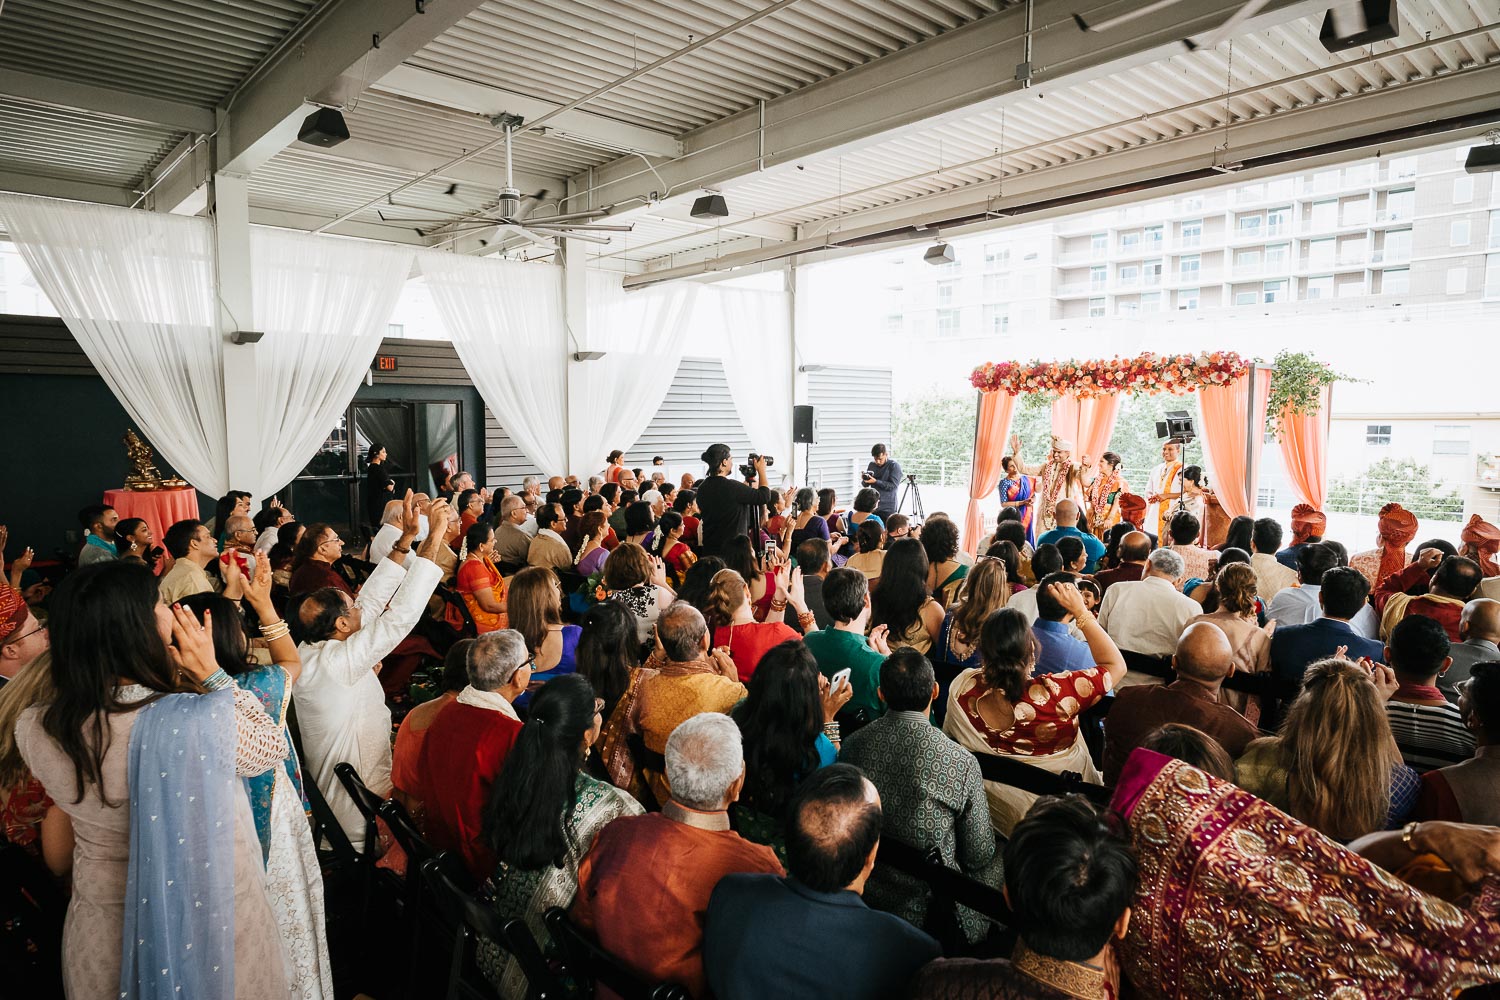 Brazos Hall in Austin Texa South Asian ceremony shows guests packed to view